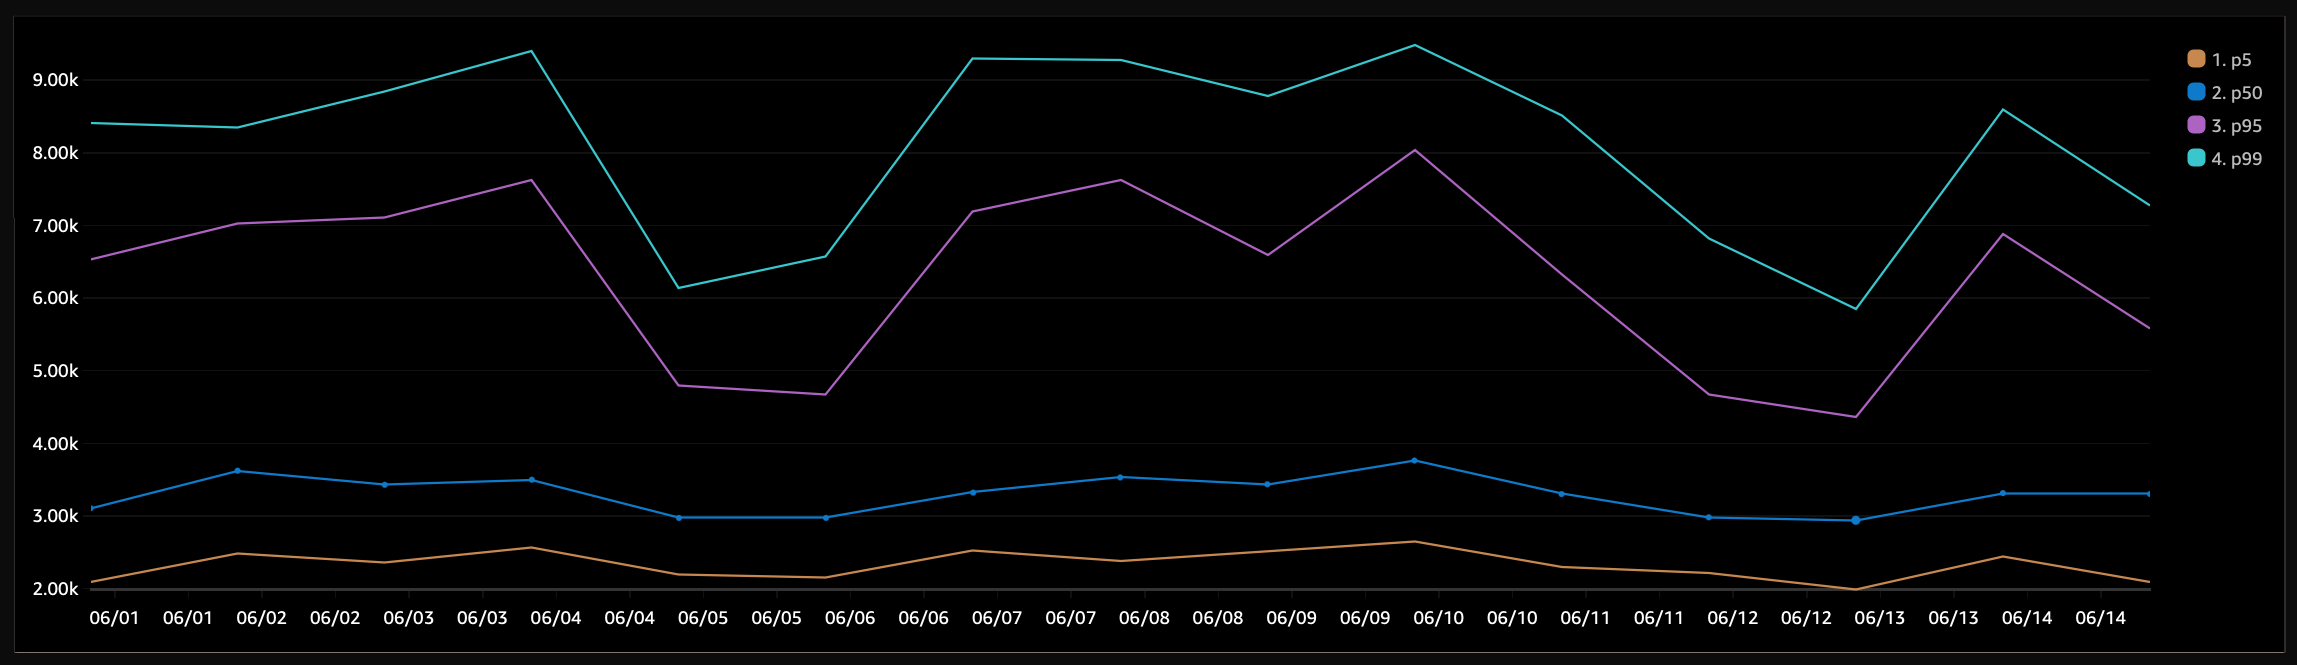 Rails cold start data from CloudWatch Insights. Shows percentiles for p5, p50, p95, and p99.